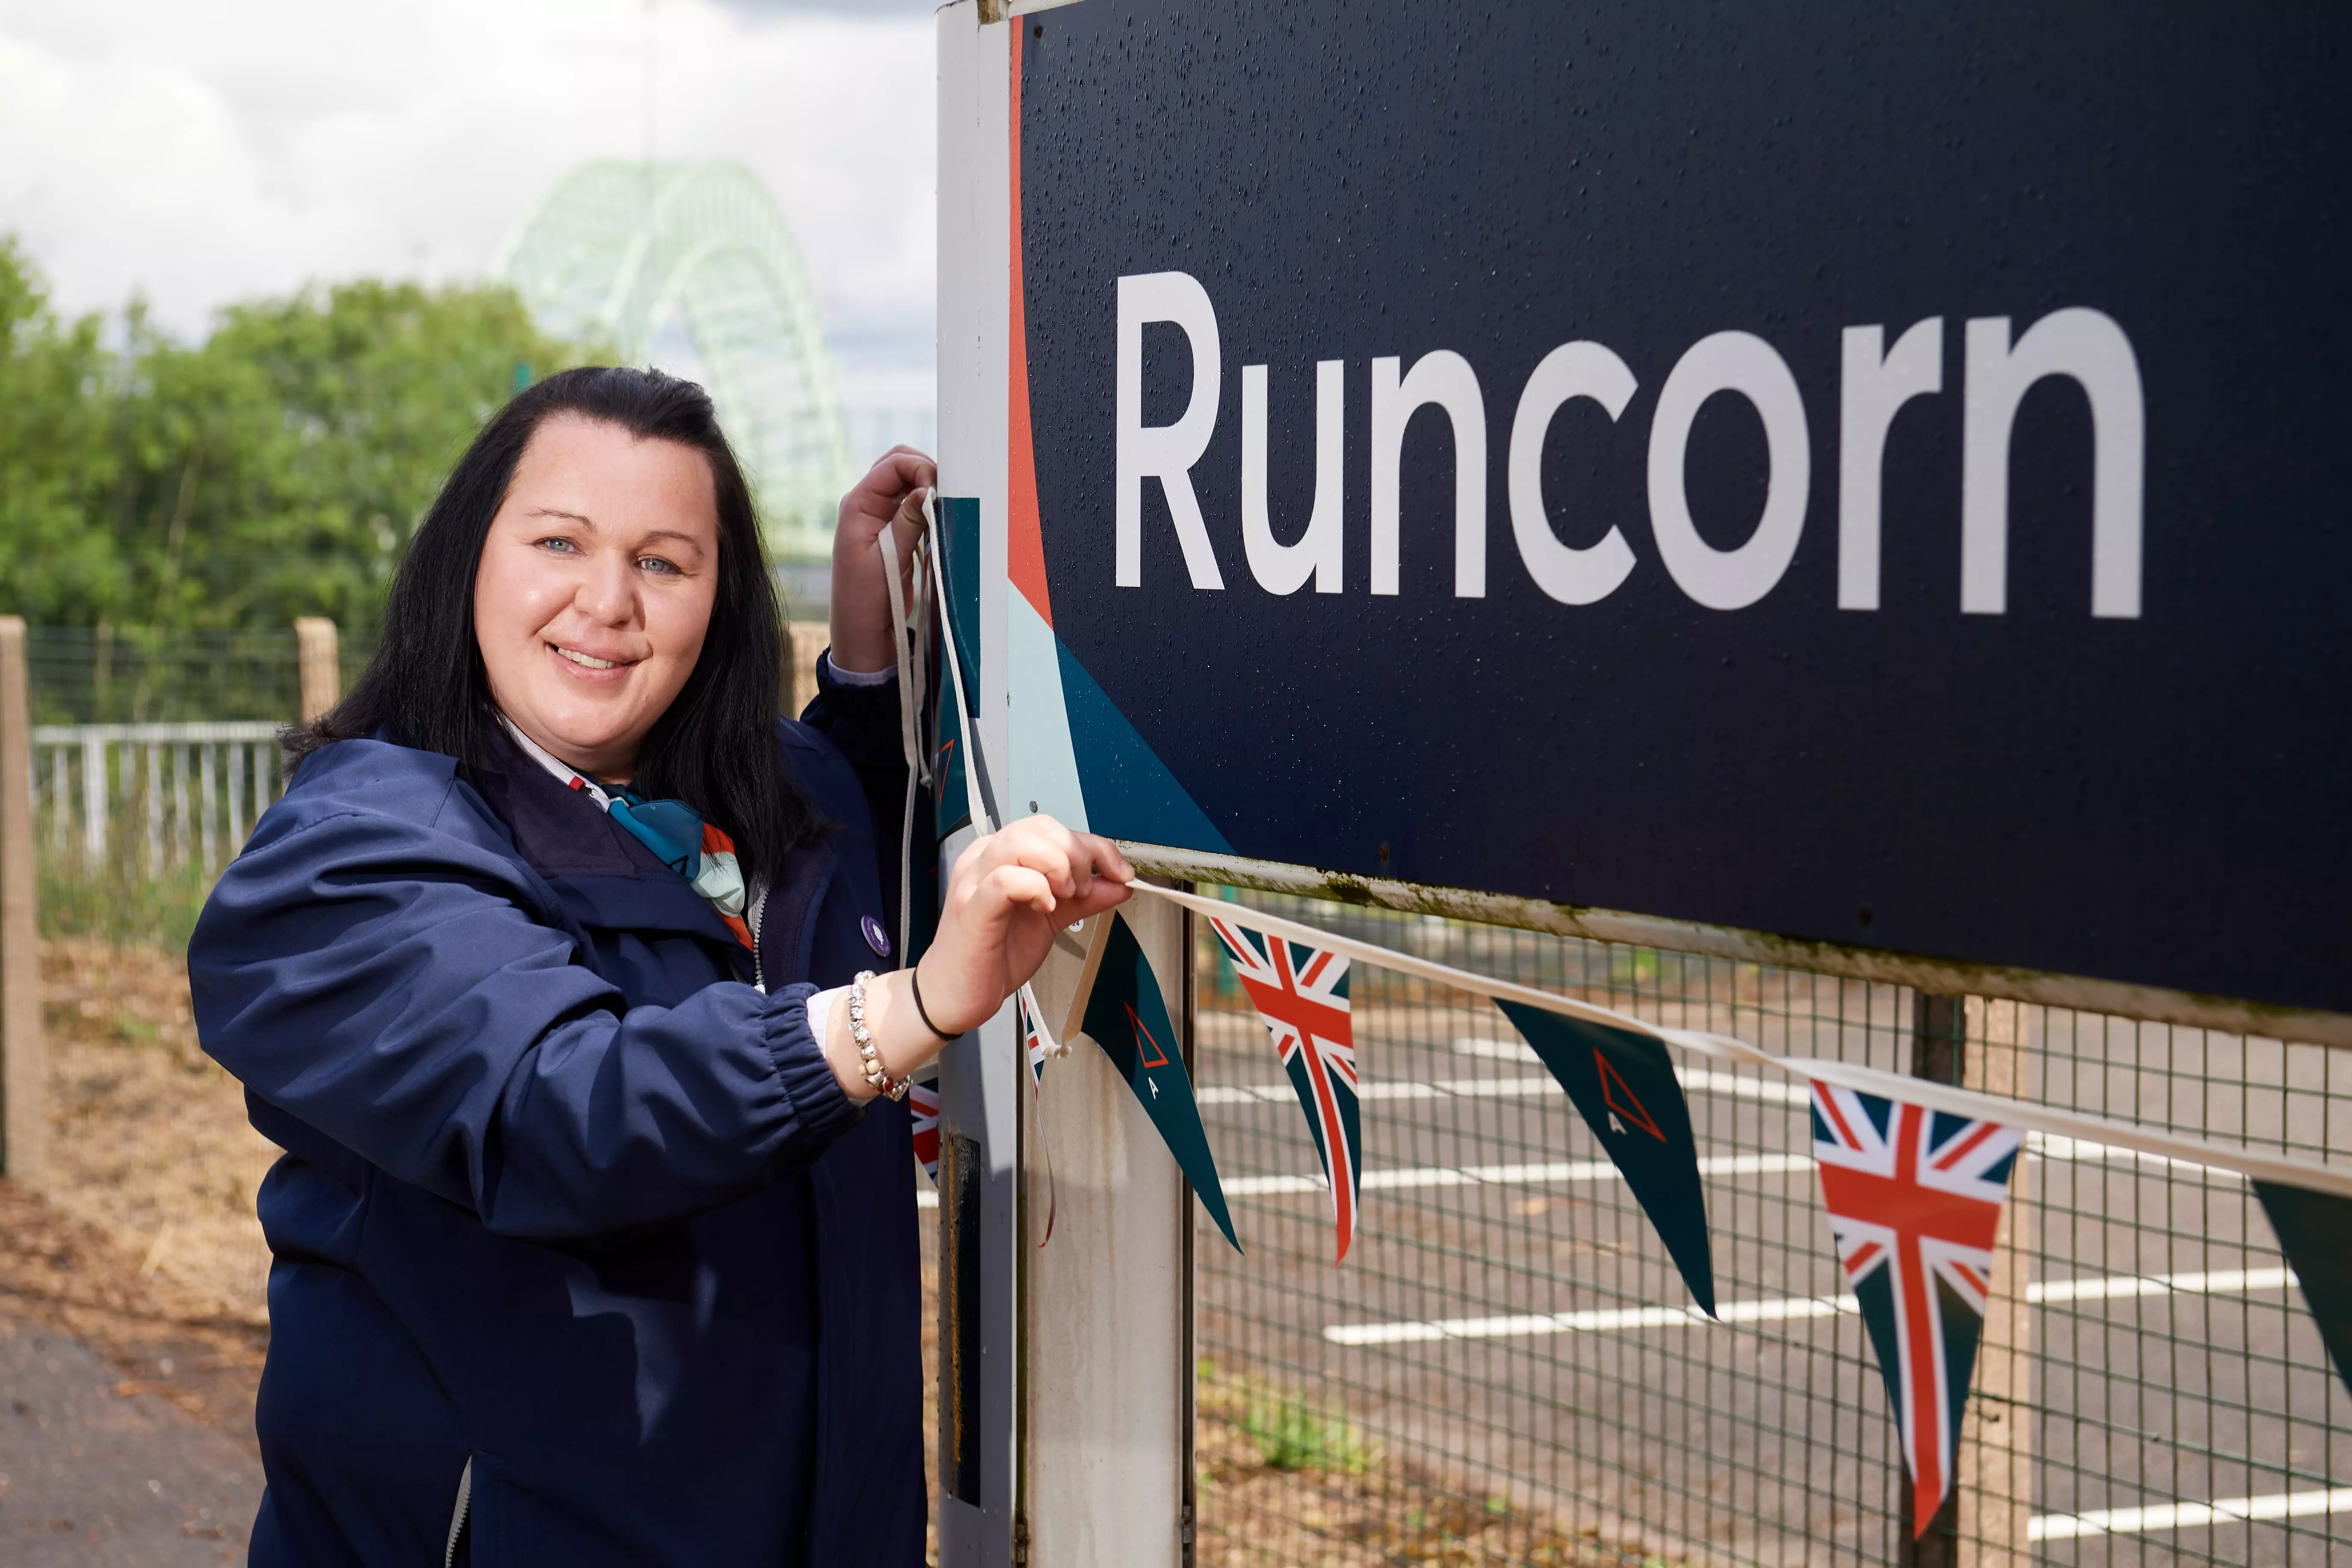 Laura Warwick at Runcorn station putting up flags for Queen's Jubilee